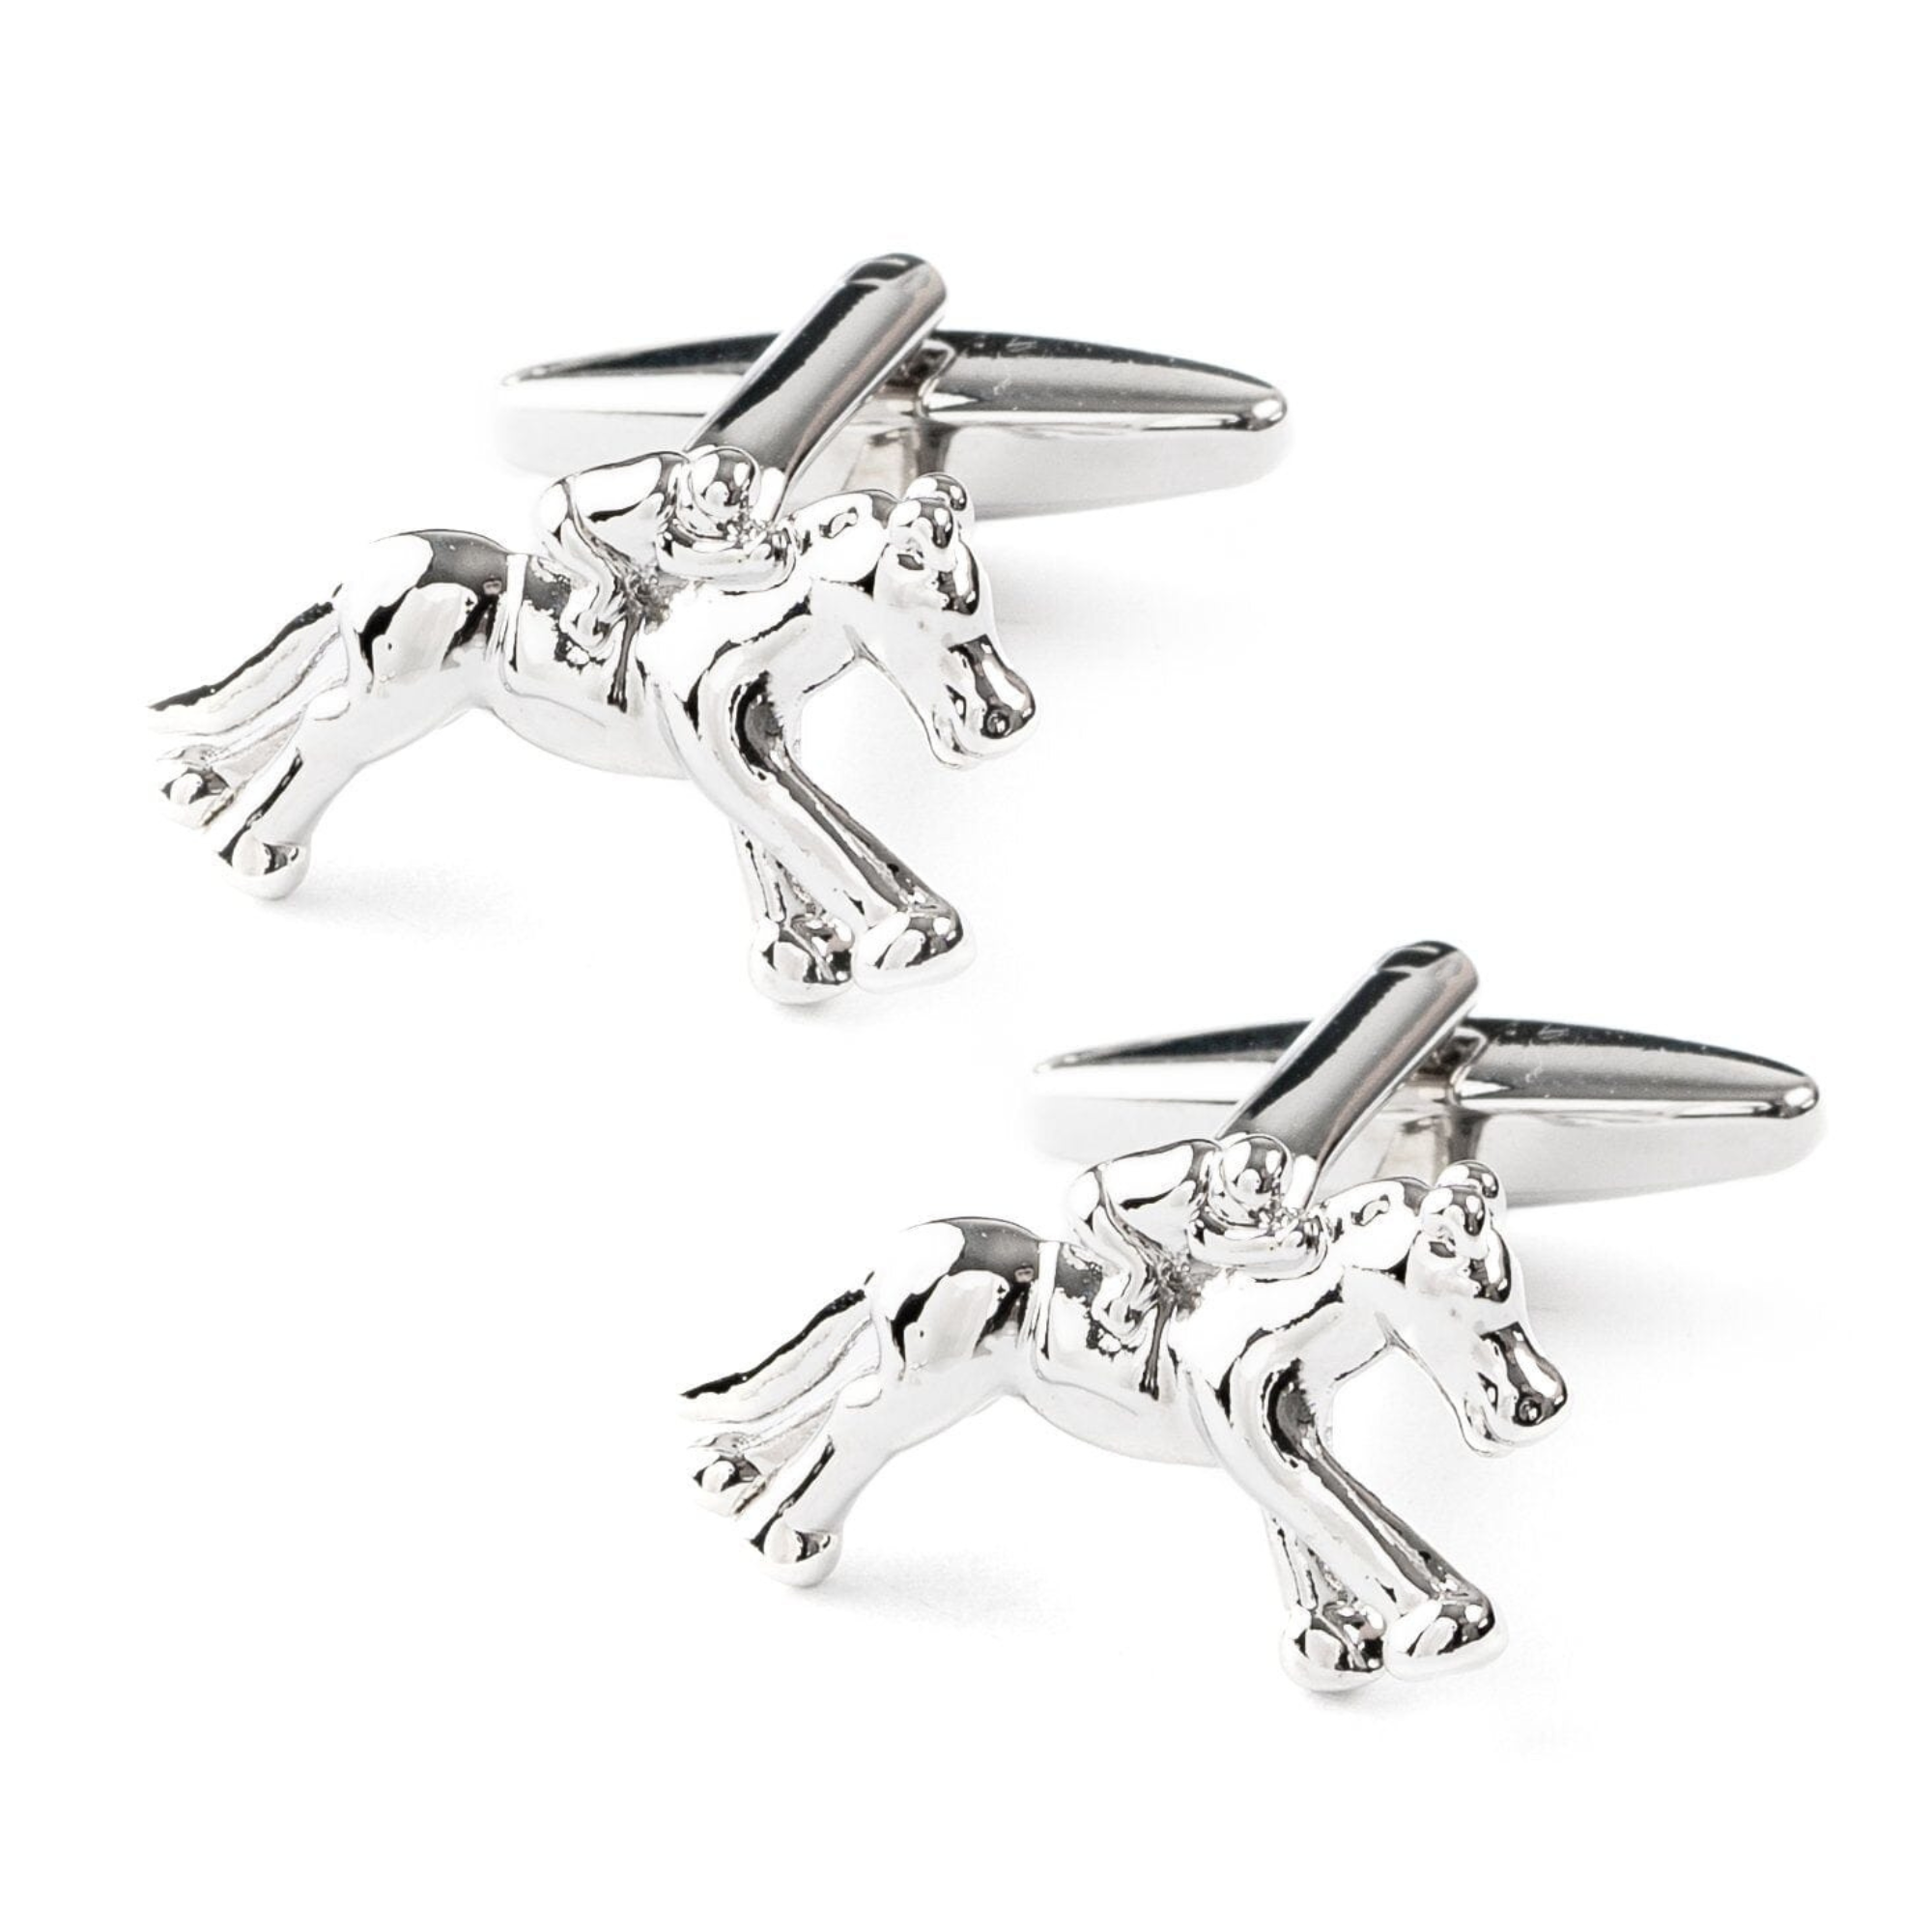 "Melbourne Cup" Horse Racing Silver Cufflinks